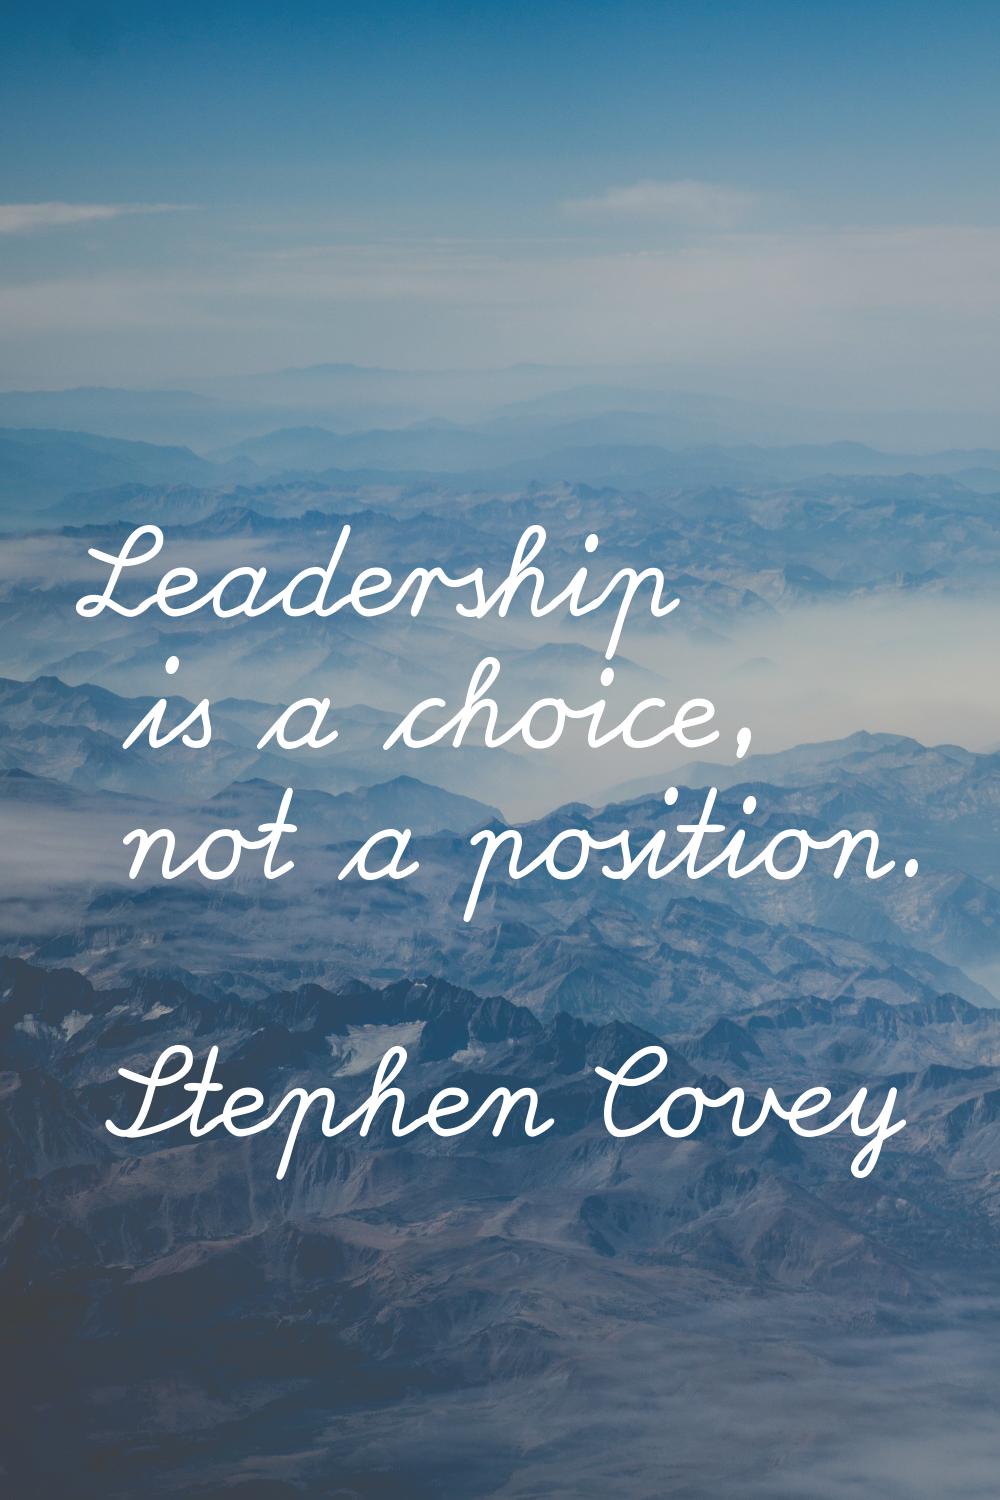 Leadership is a choice, not a position.